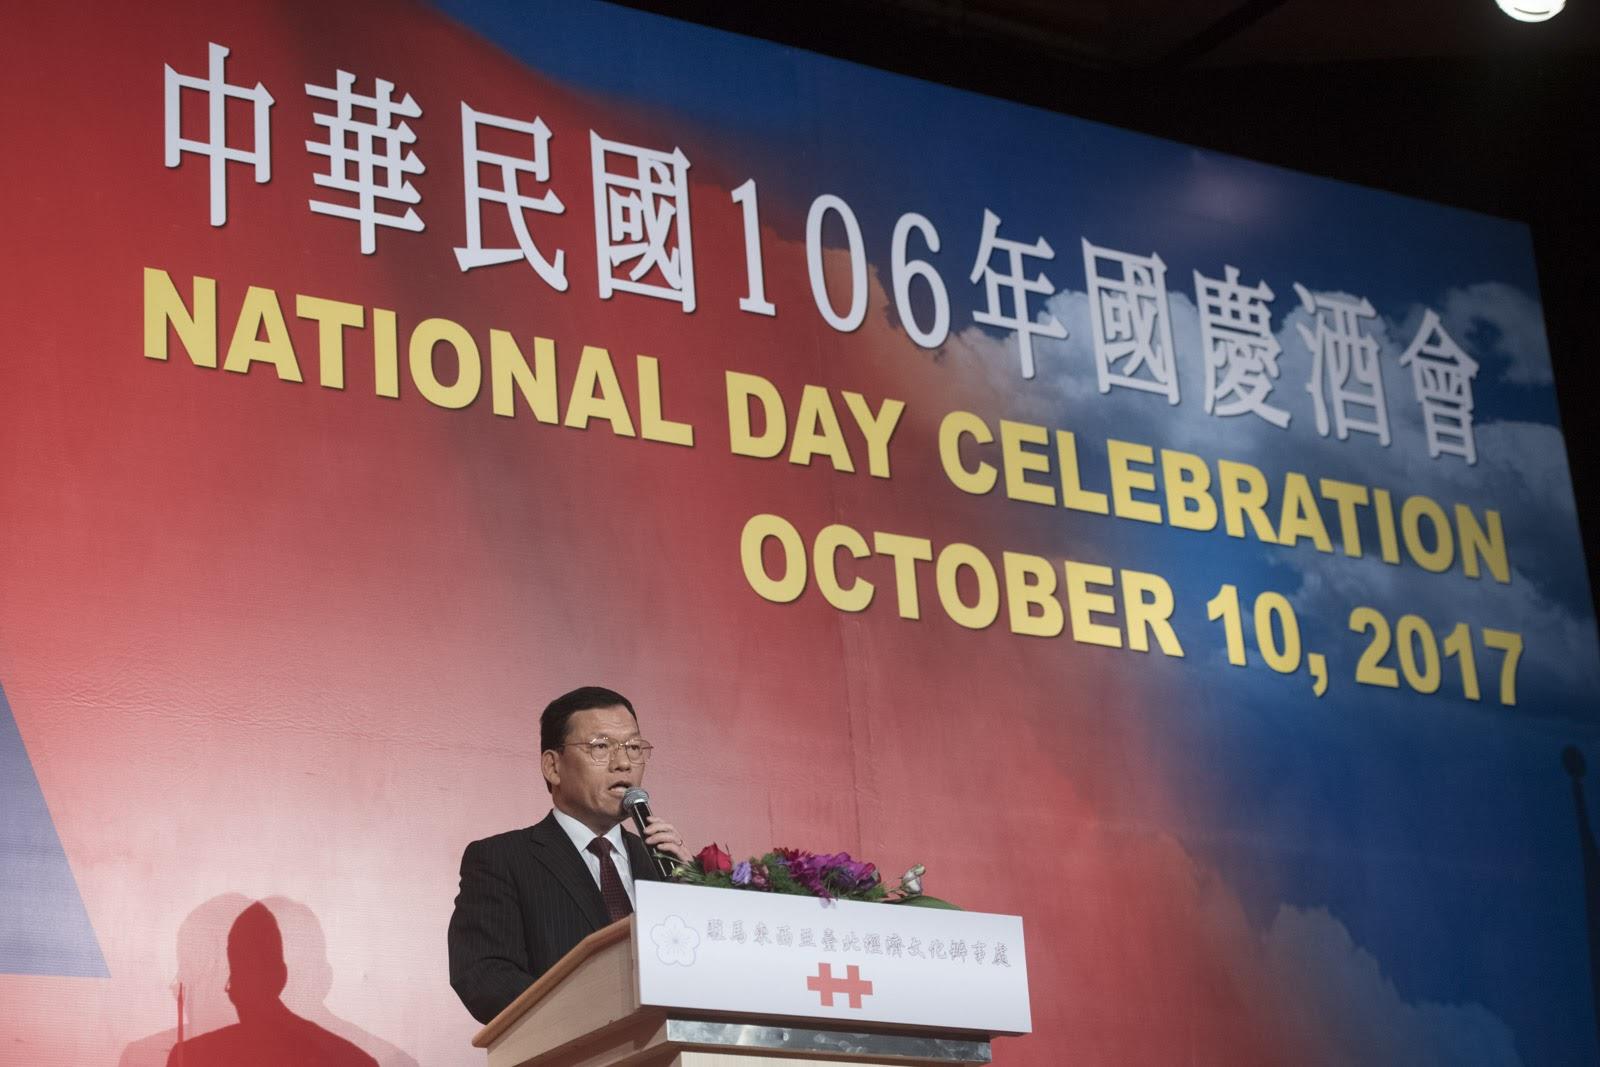 Amb. Chang delivered his speech during the National Day Ceremony of the Republic of China.